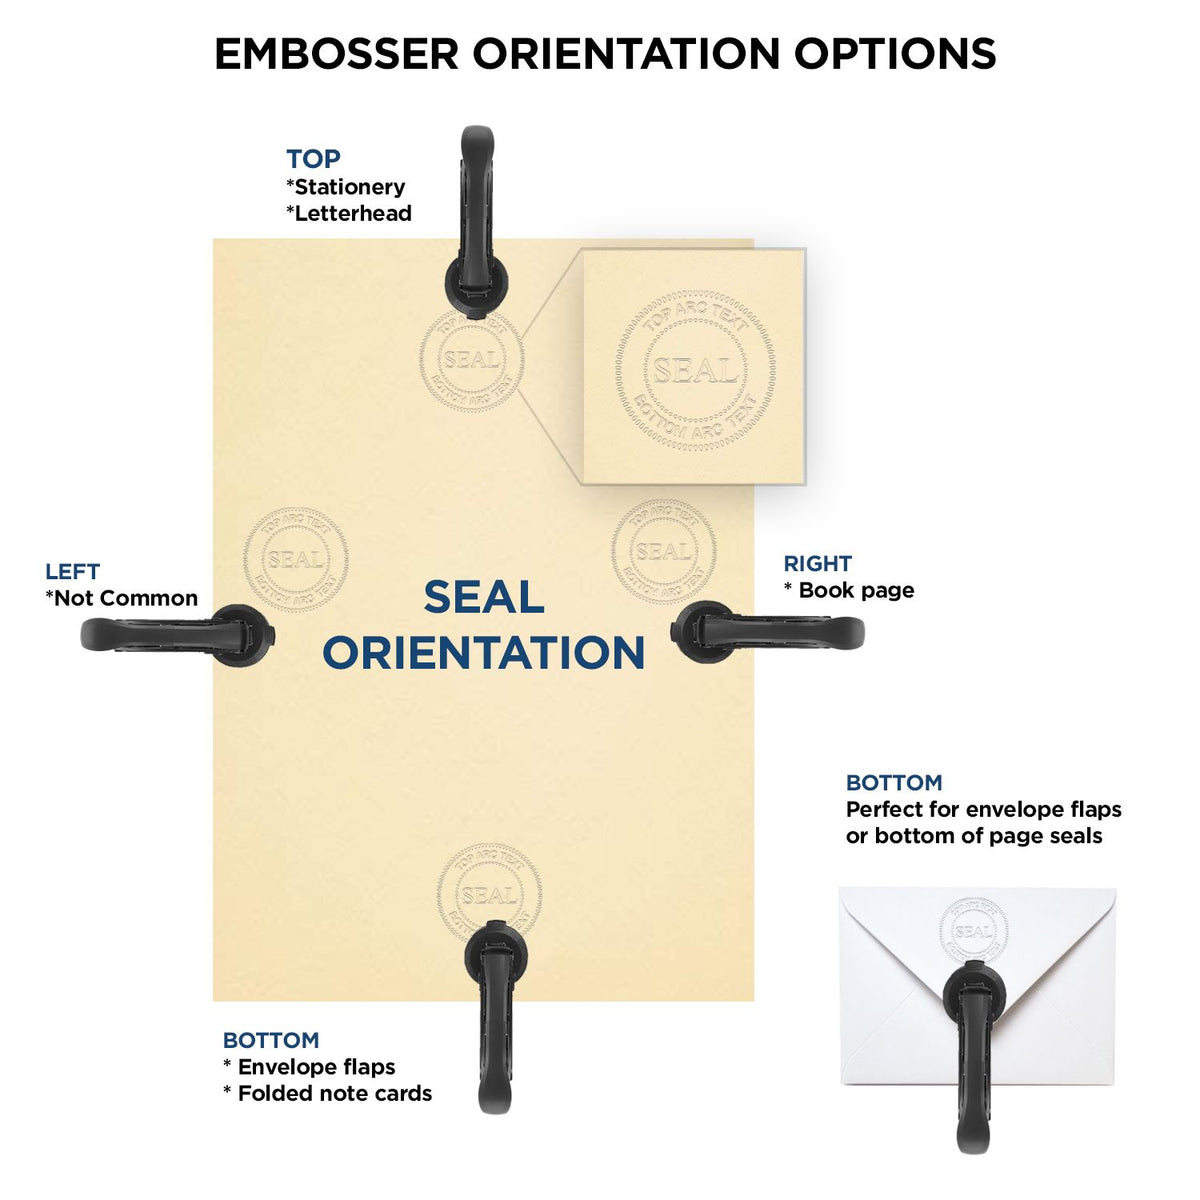 An infographic for the Heavy Duty Cast Iron Michigan Architect Embosser showing embosser orientation, this is showing examples of a top, bottom, right and left insert.